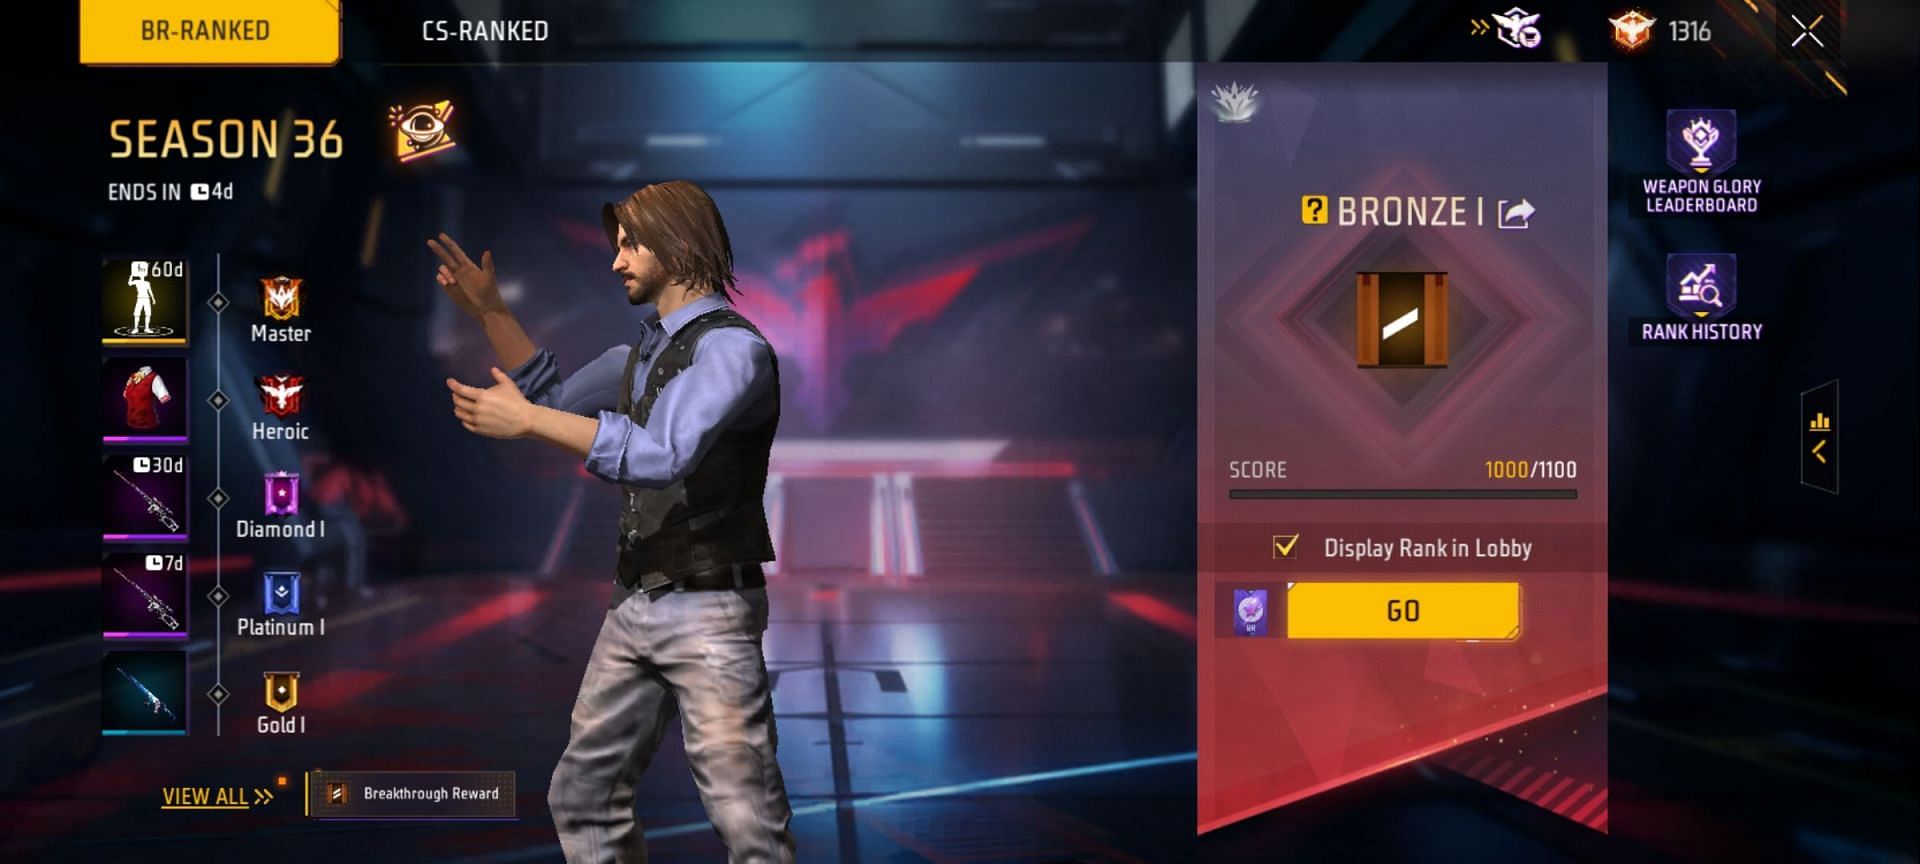 Free Fire Battle Royale Ranked Season 37 will begin once the current season ends (Image via Garena)